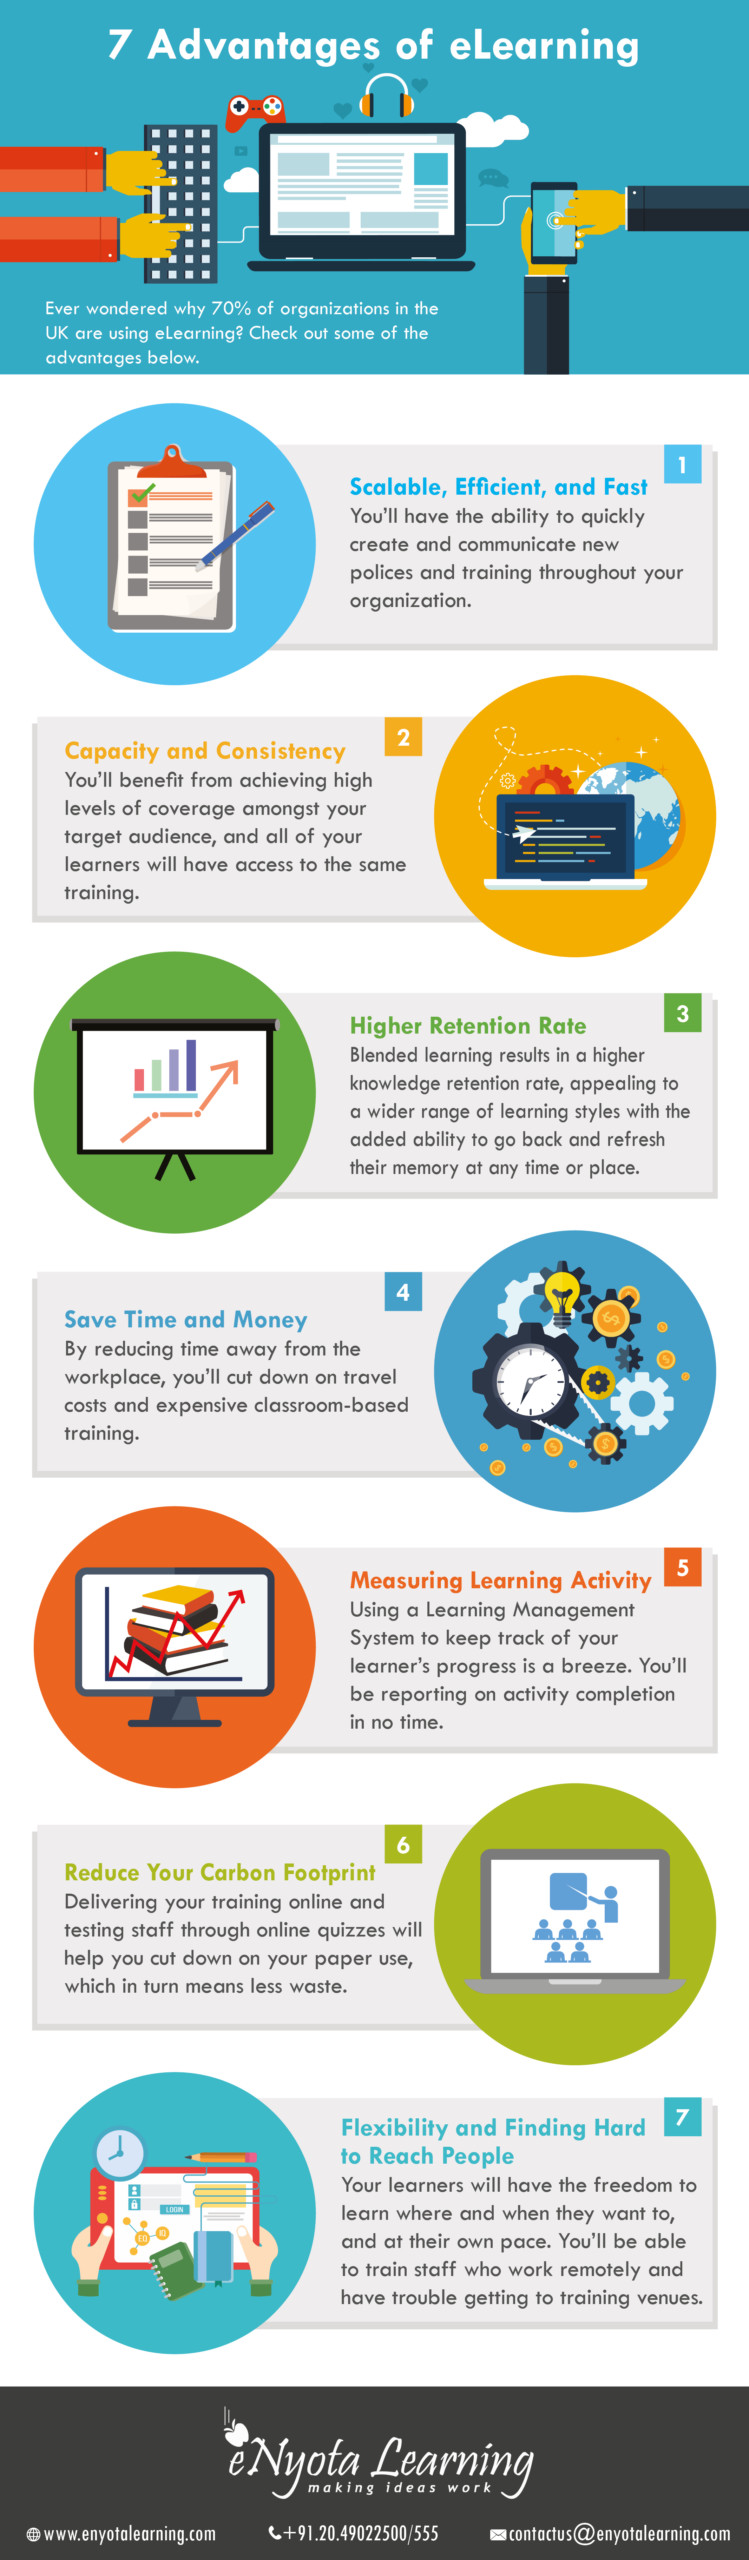 7 Advantages of eLearning